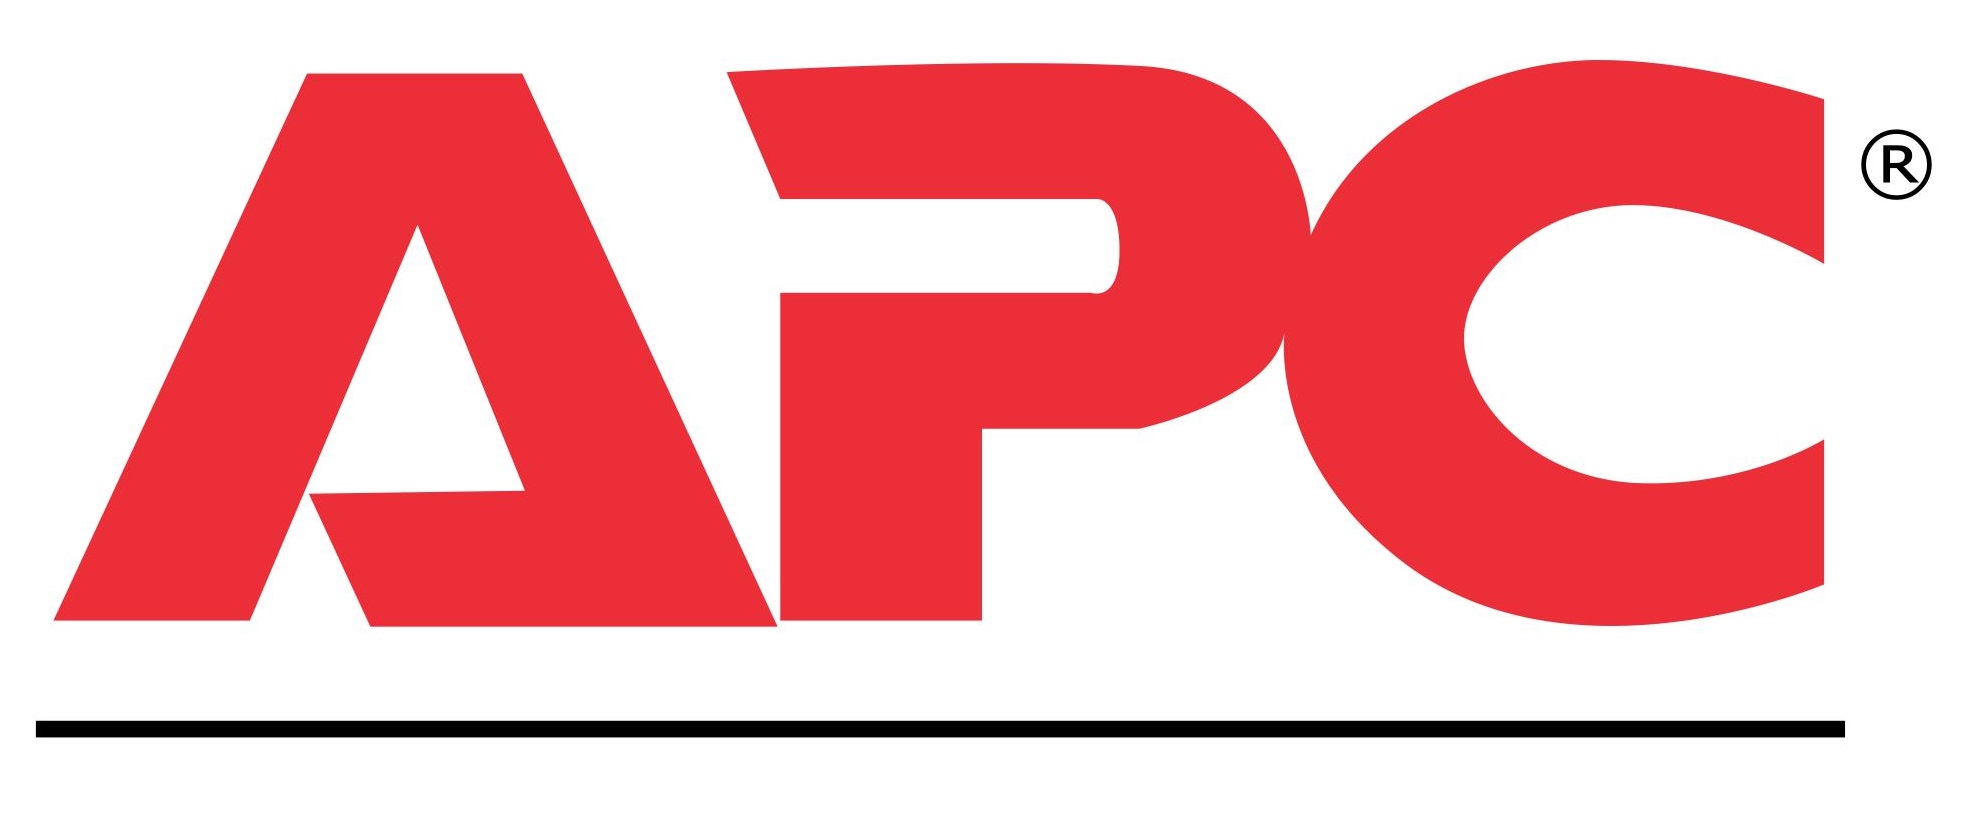 APC (CFWE-PLUS3YR-SU-03) EXTENDS FACTORY WARRANTY OF A 2.1-3KVA UPS BY 3 ADDITIONAL YEARS